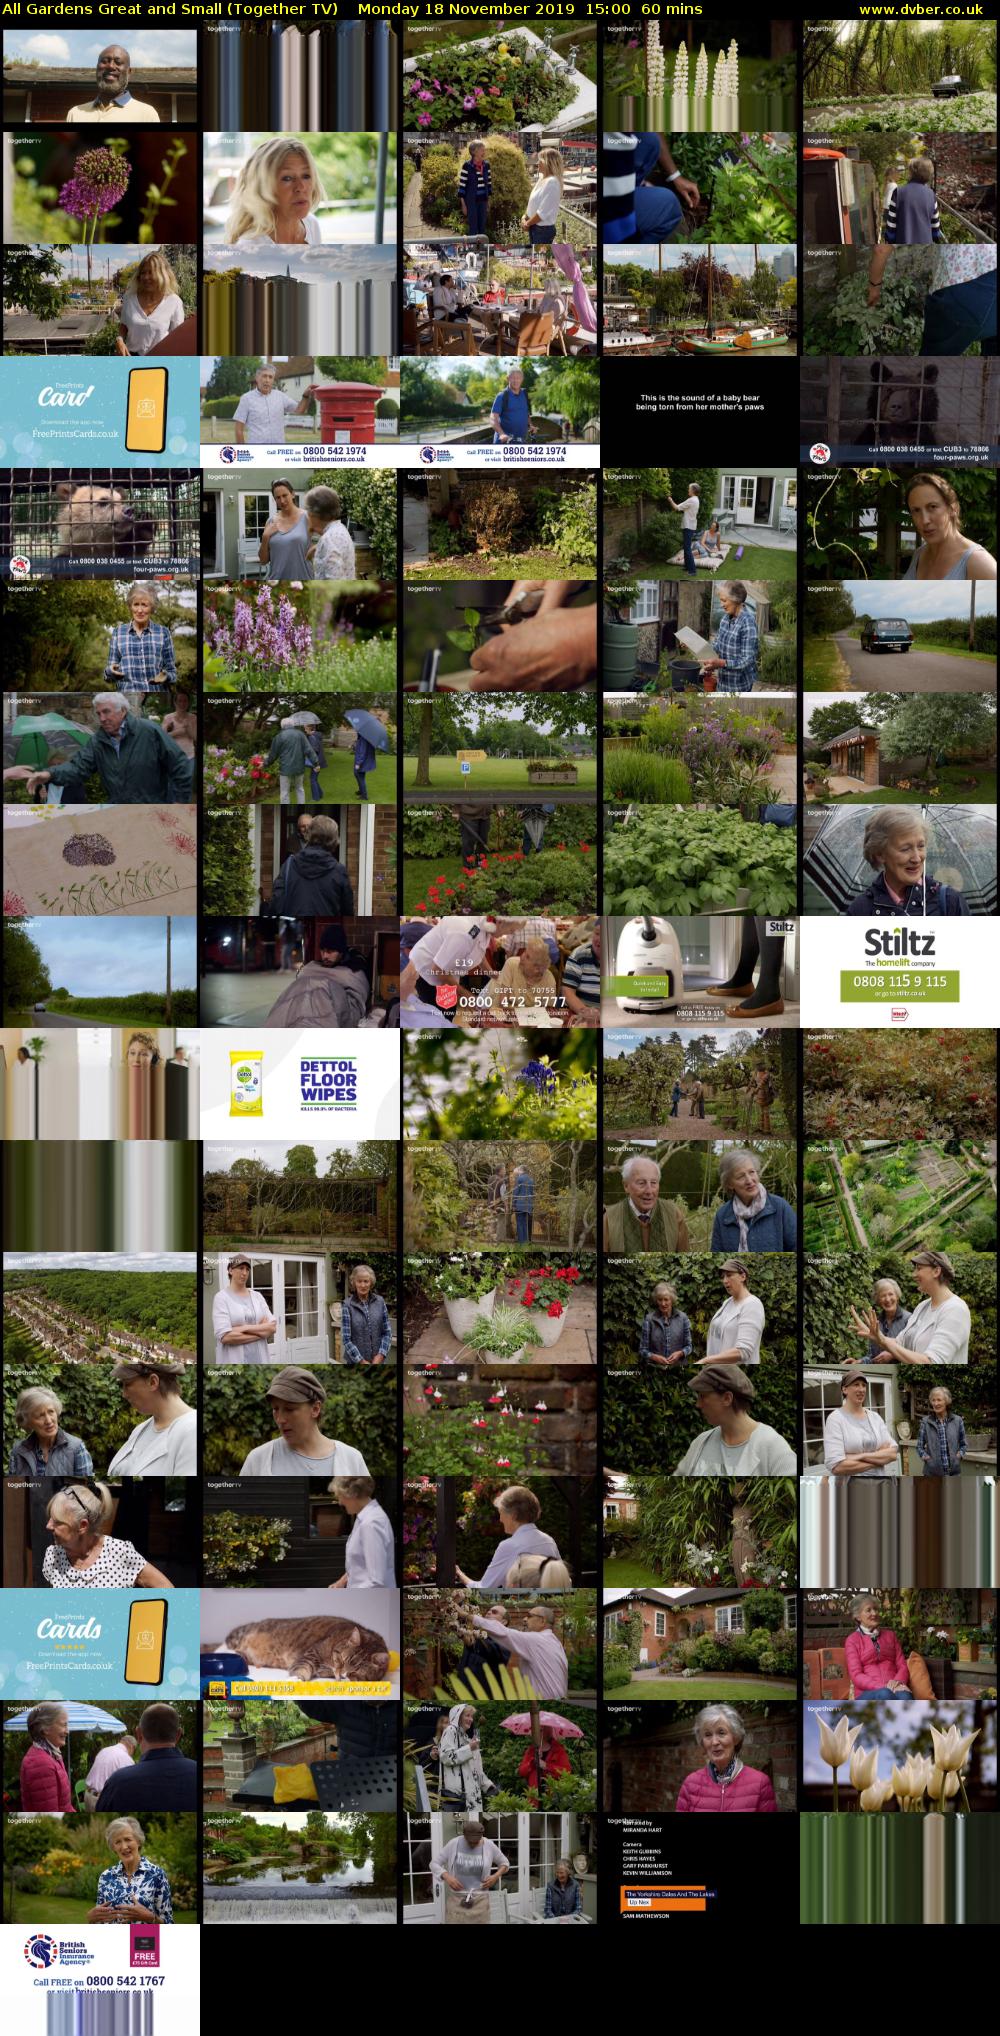 All Gardens Great and Small (Together TV) Monday 18 November 2019 15:00 - 16:00